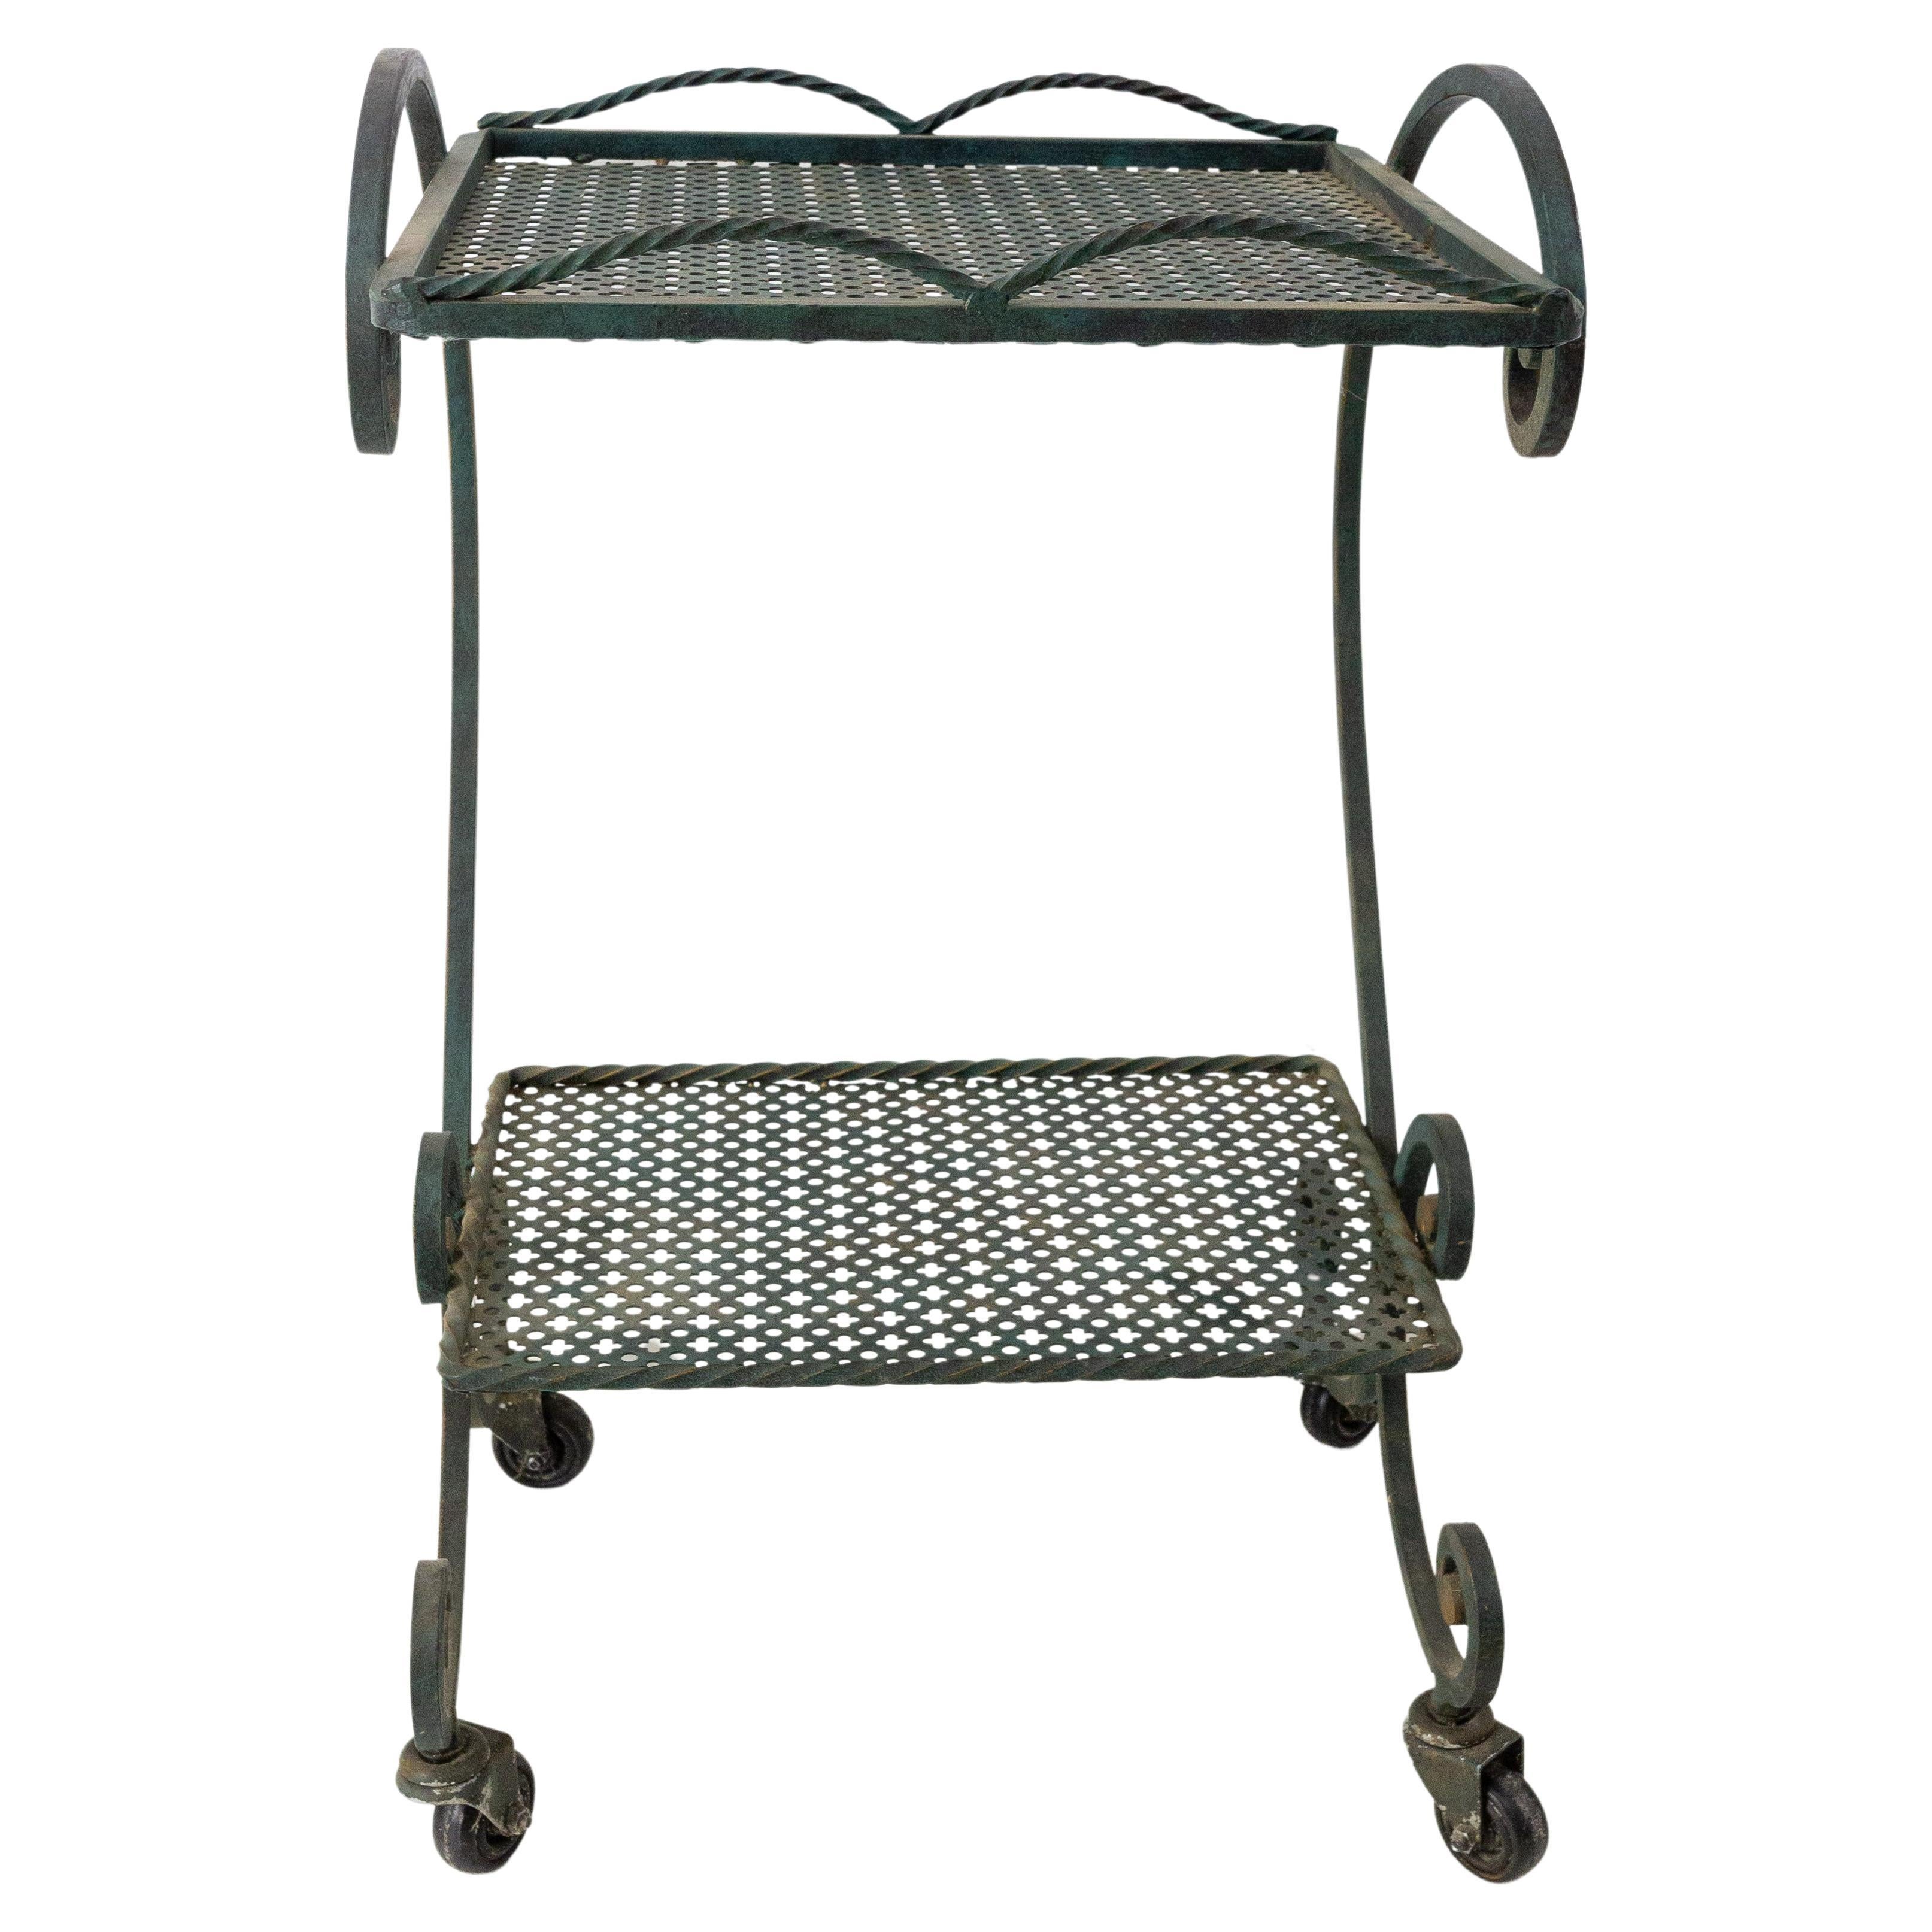 Vintage iron desserte trolley, side table or end of sofa.
In the Matégot style.
French, circa 1960.
Good vintage condition.

Shipping:
P 32.5 L 34.5 H59.5 5.4 Kg.